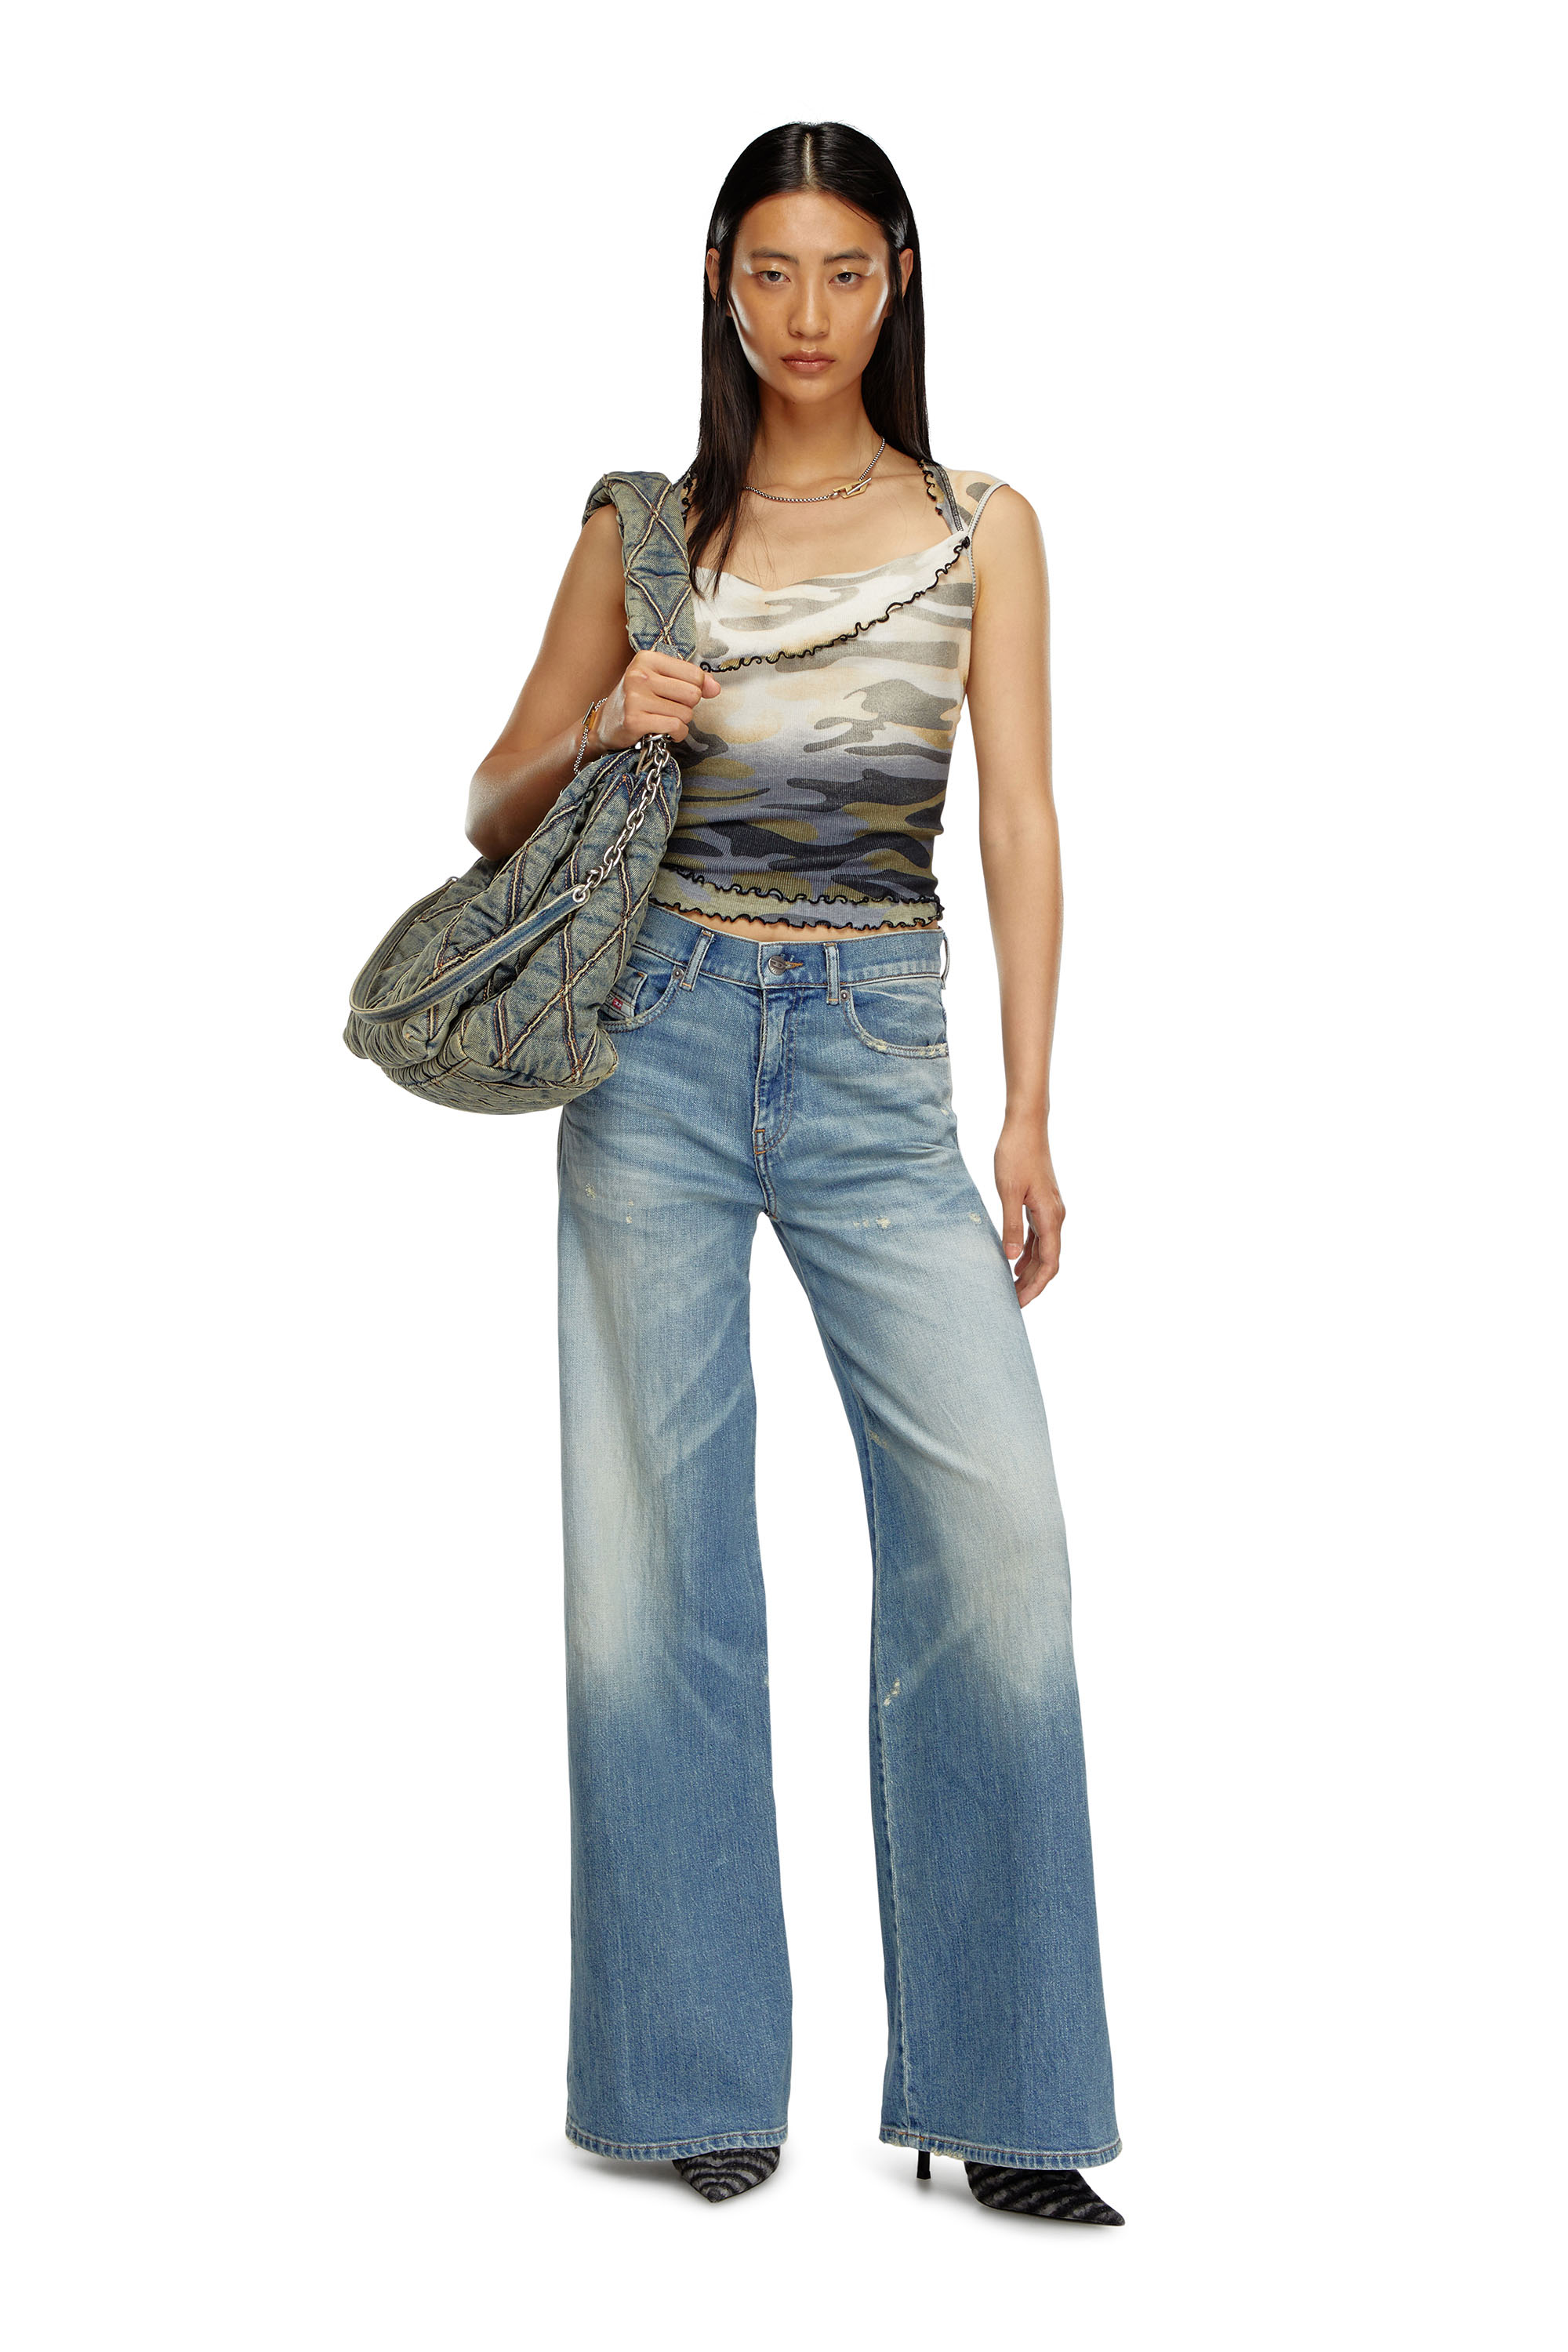 Diesel - Bootcut and Flare Jeans 1978 D-Akemi 09J44, Mujer Bootcut y Flare Jeans - 1978 D-Akemi in Azul marino - Image 1